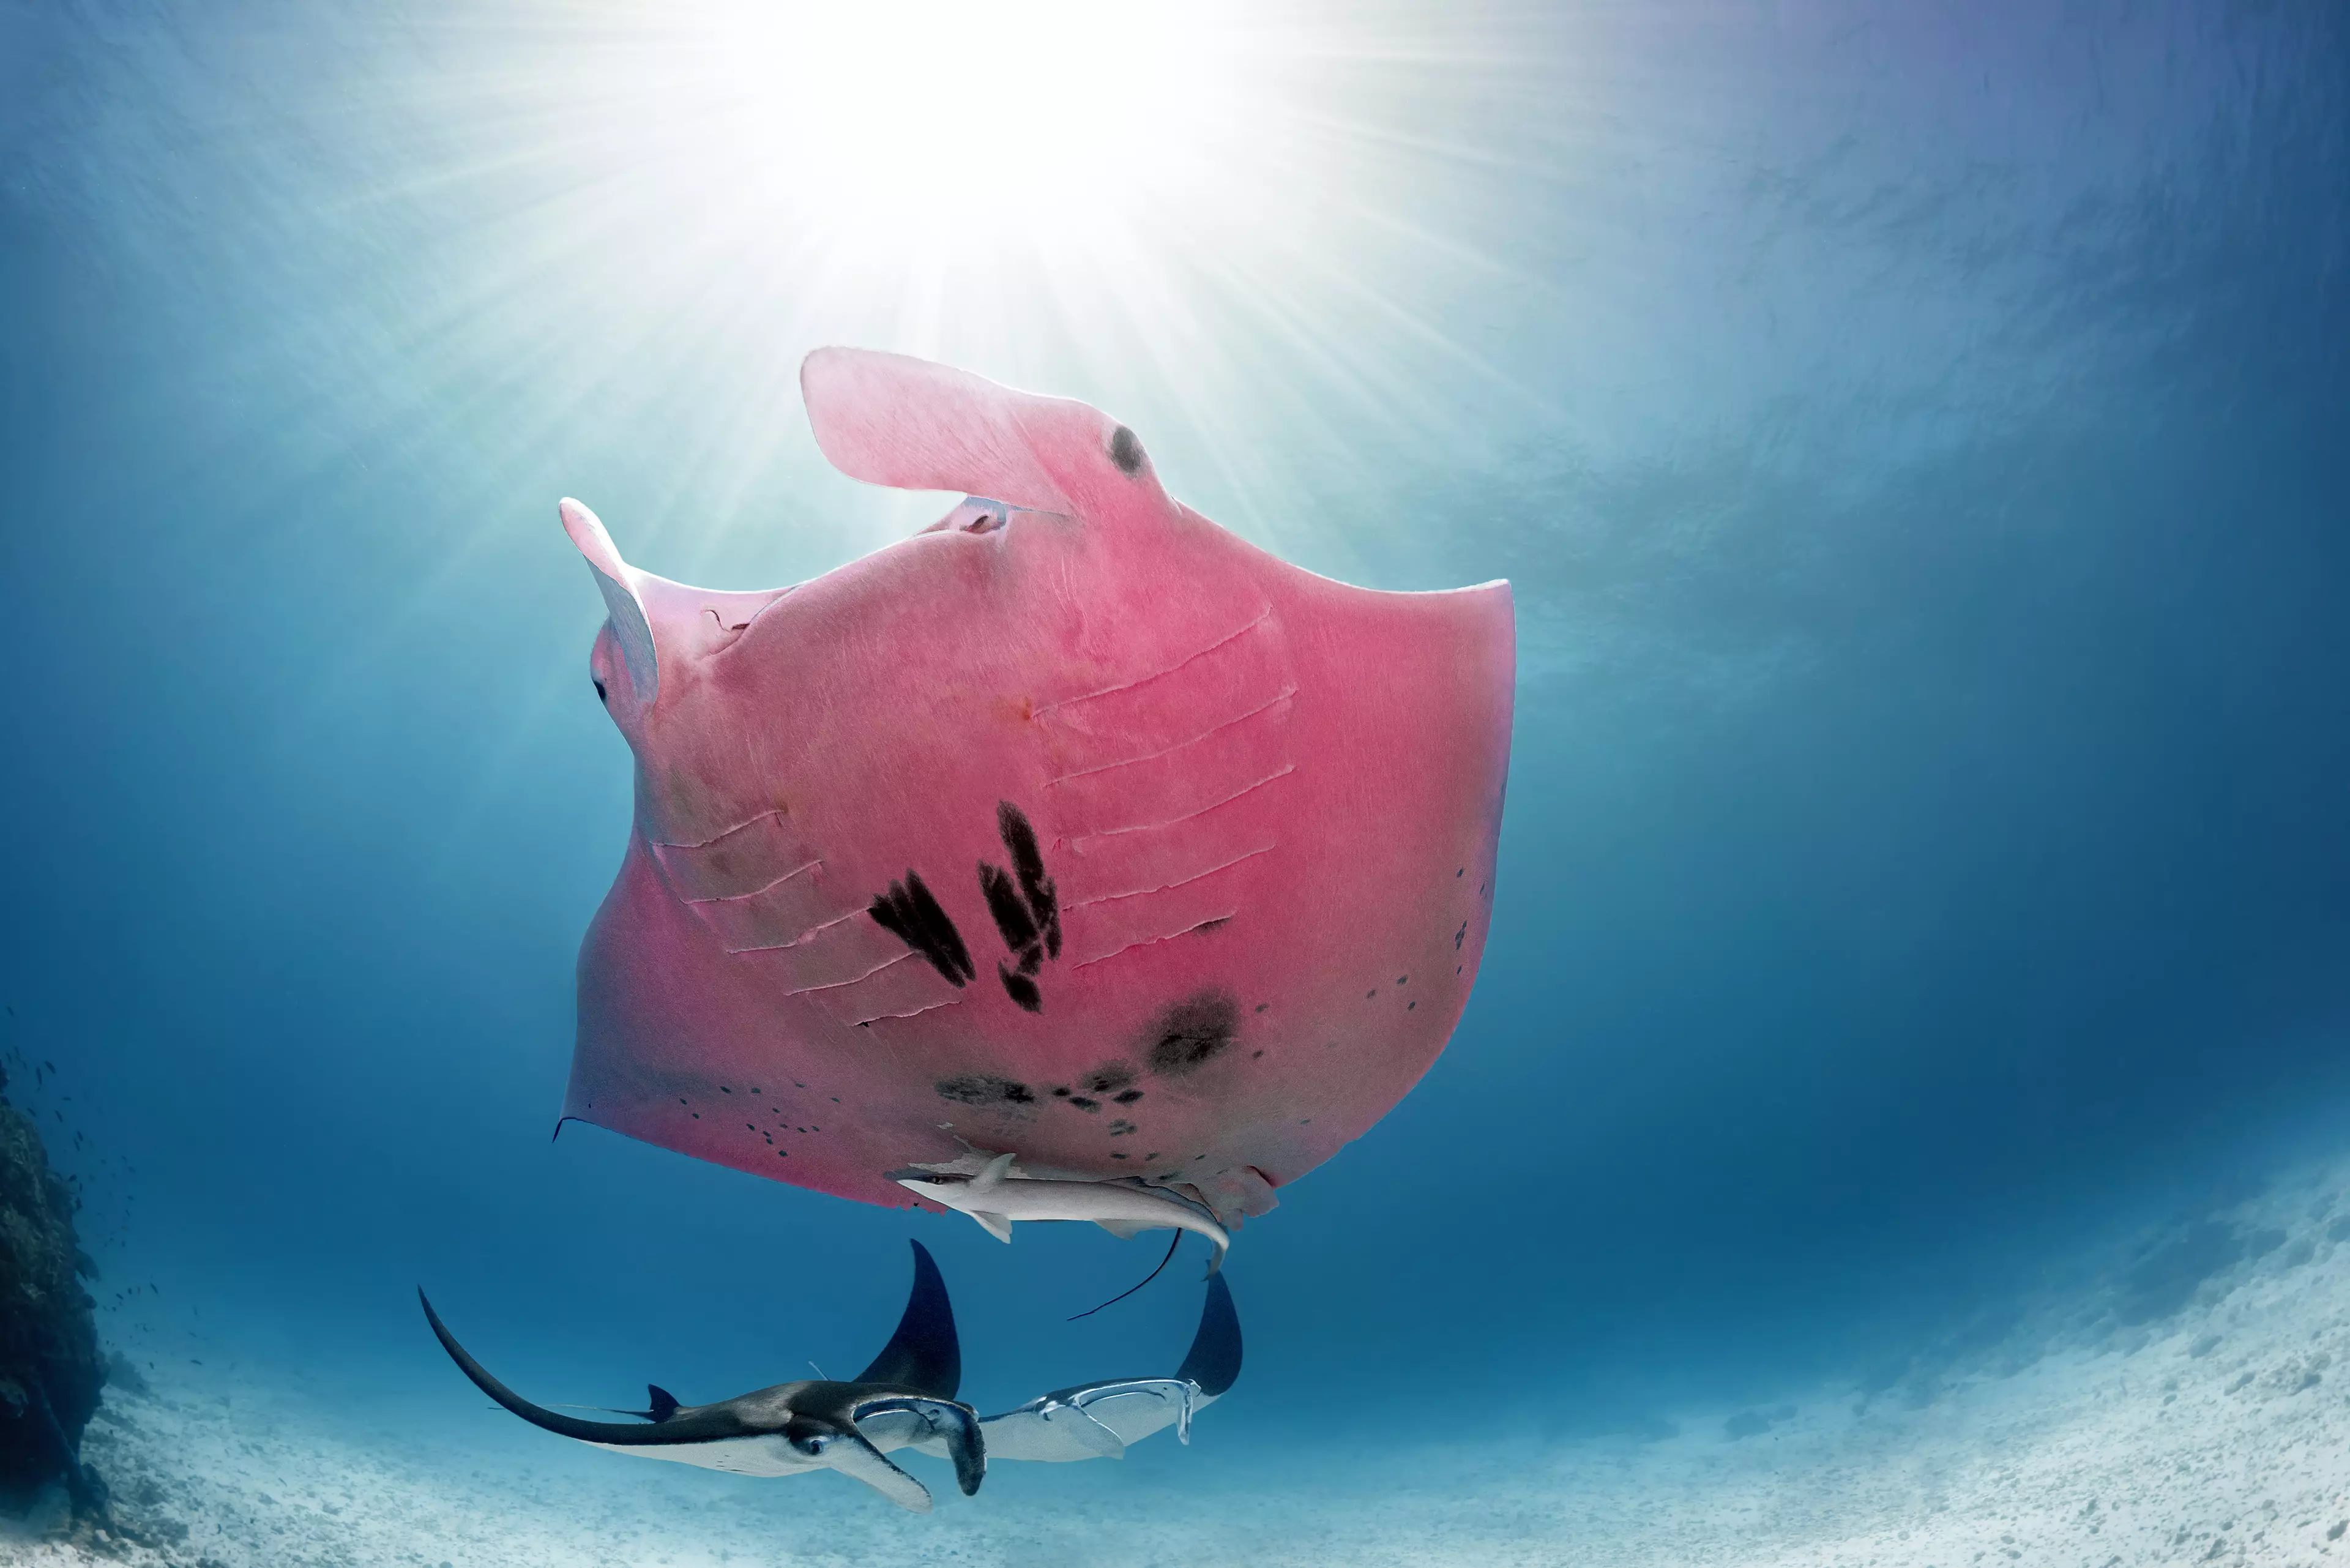 Inspector Clouseau is the only known pink manta ray in the world.